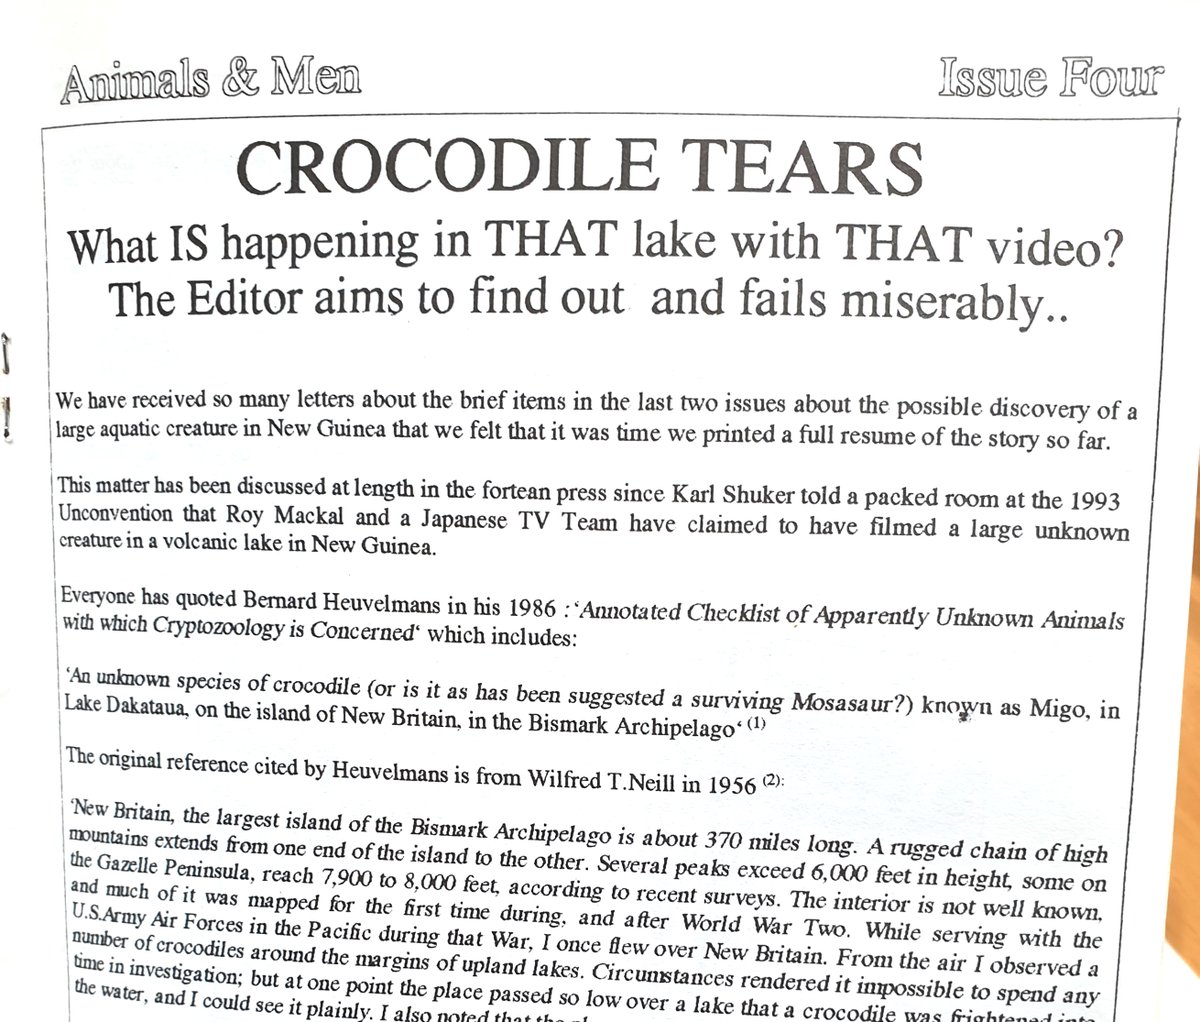 Jon wrote about the footage and what it showed in A&M, his general conclusion being that it was exciting (more than the “unimpressive and amorphous blob” he was hoping it wouldn’t be) but difficult to interpret…  #cryptozoology  #lakemonsters